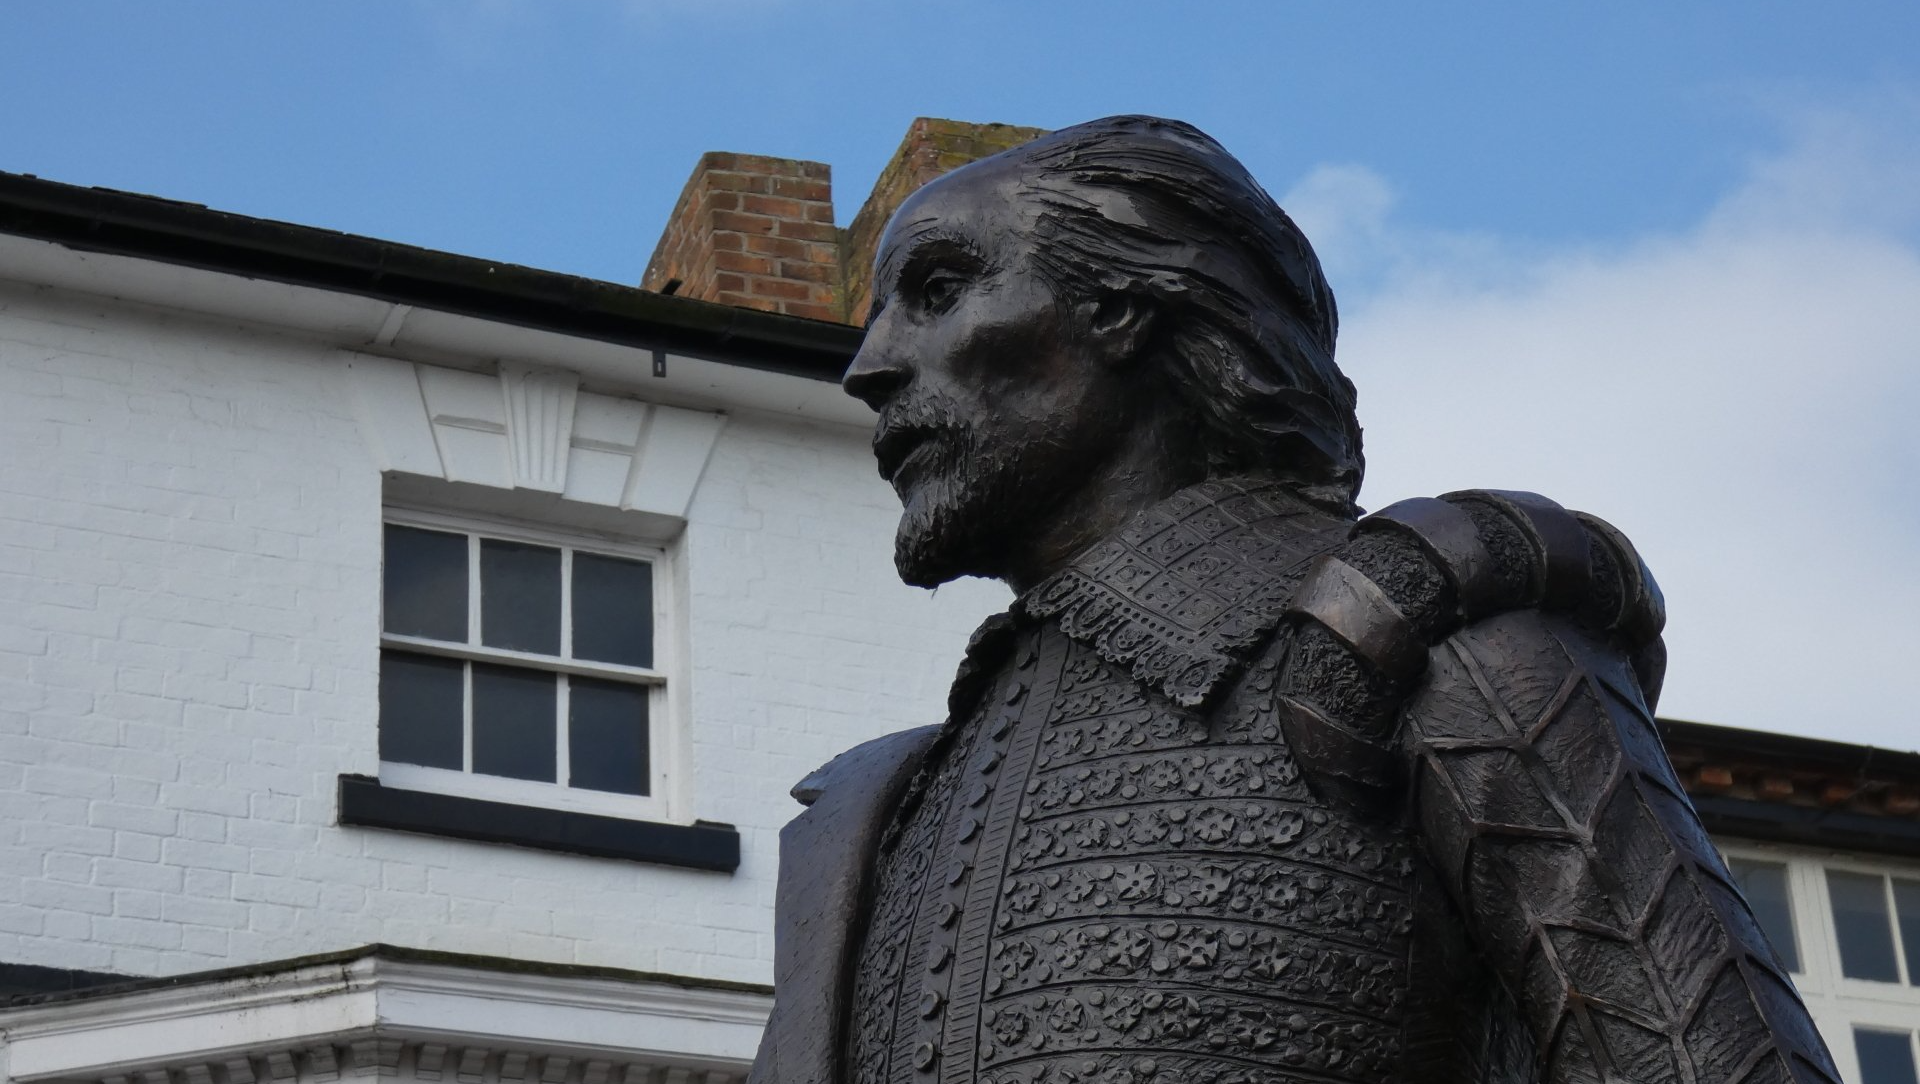 Stratford-upon-Avon: History, Culture, and Shakespearean Legacy